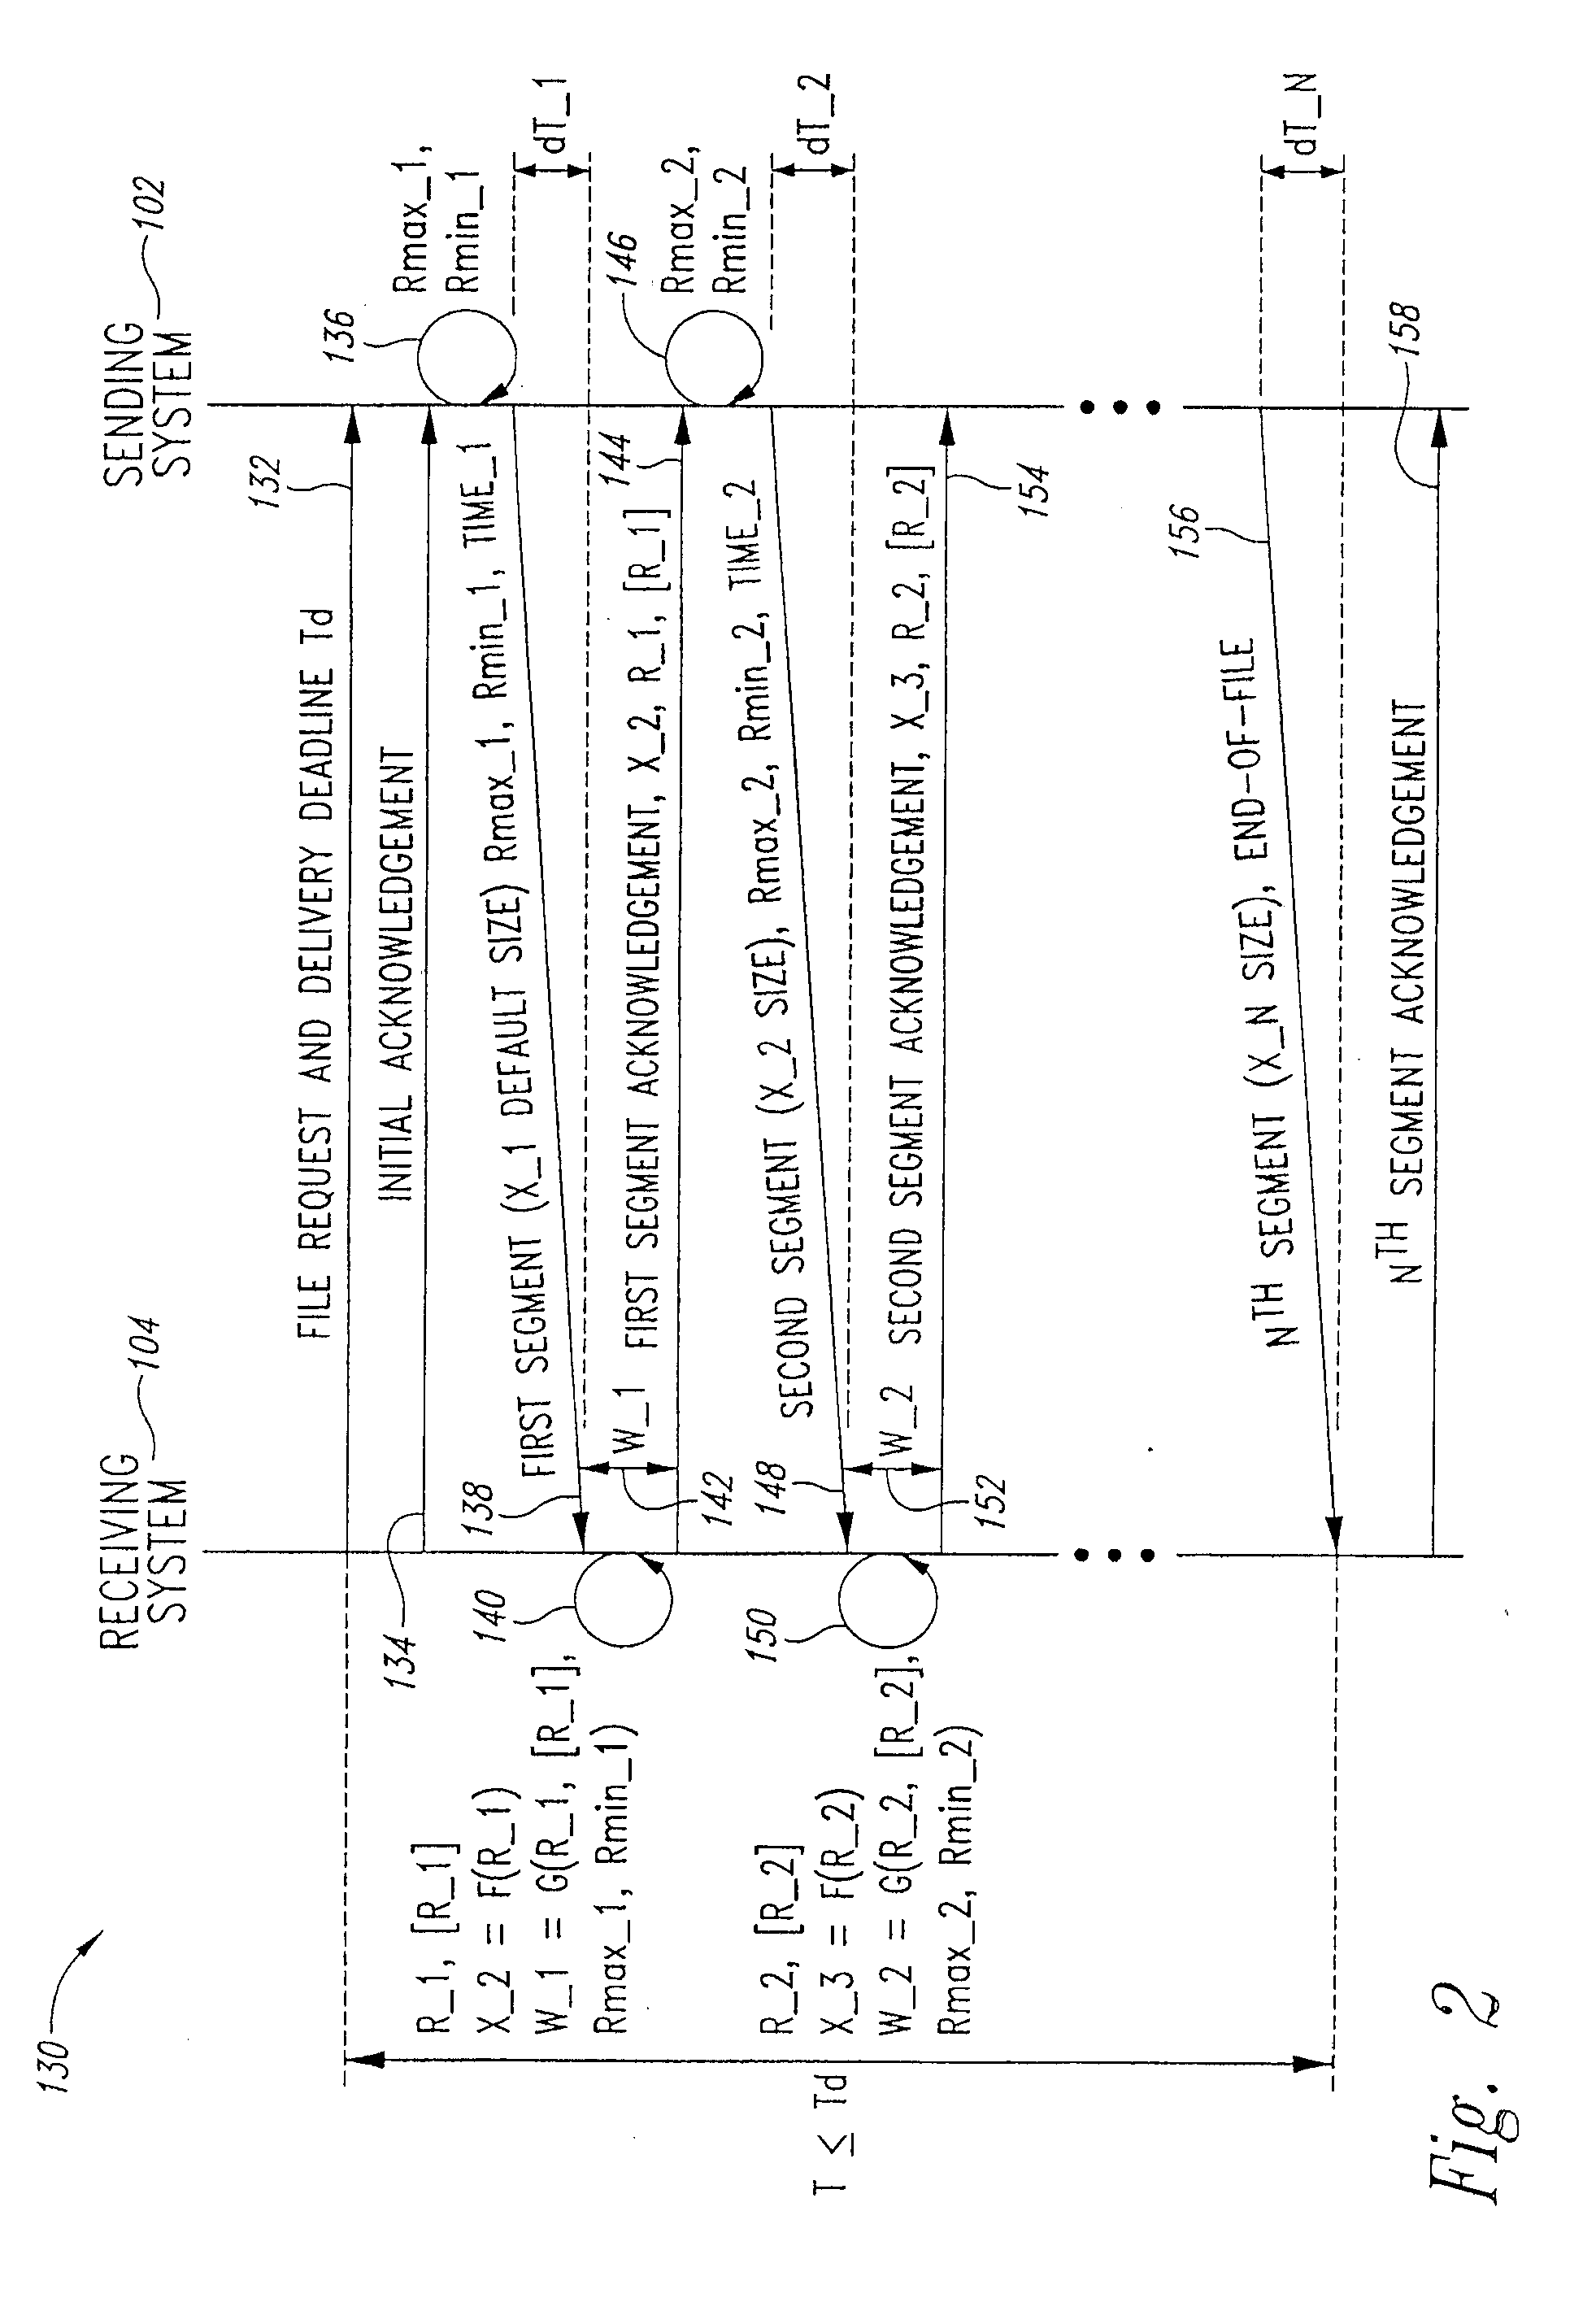 System and method for peak flow detection in a communication network